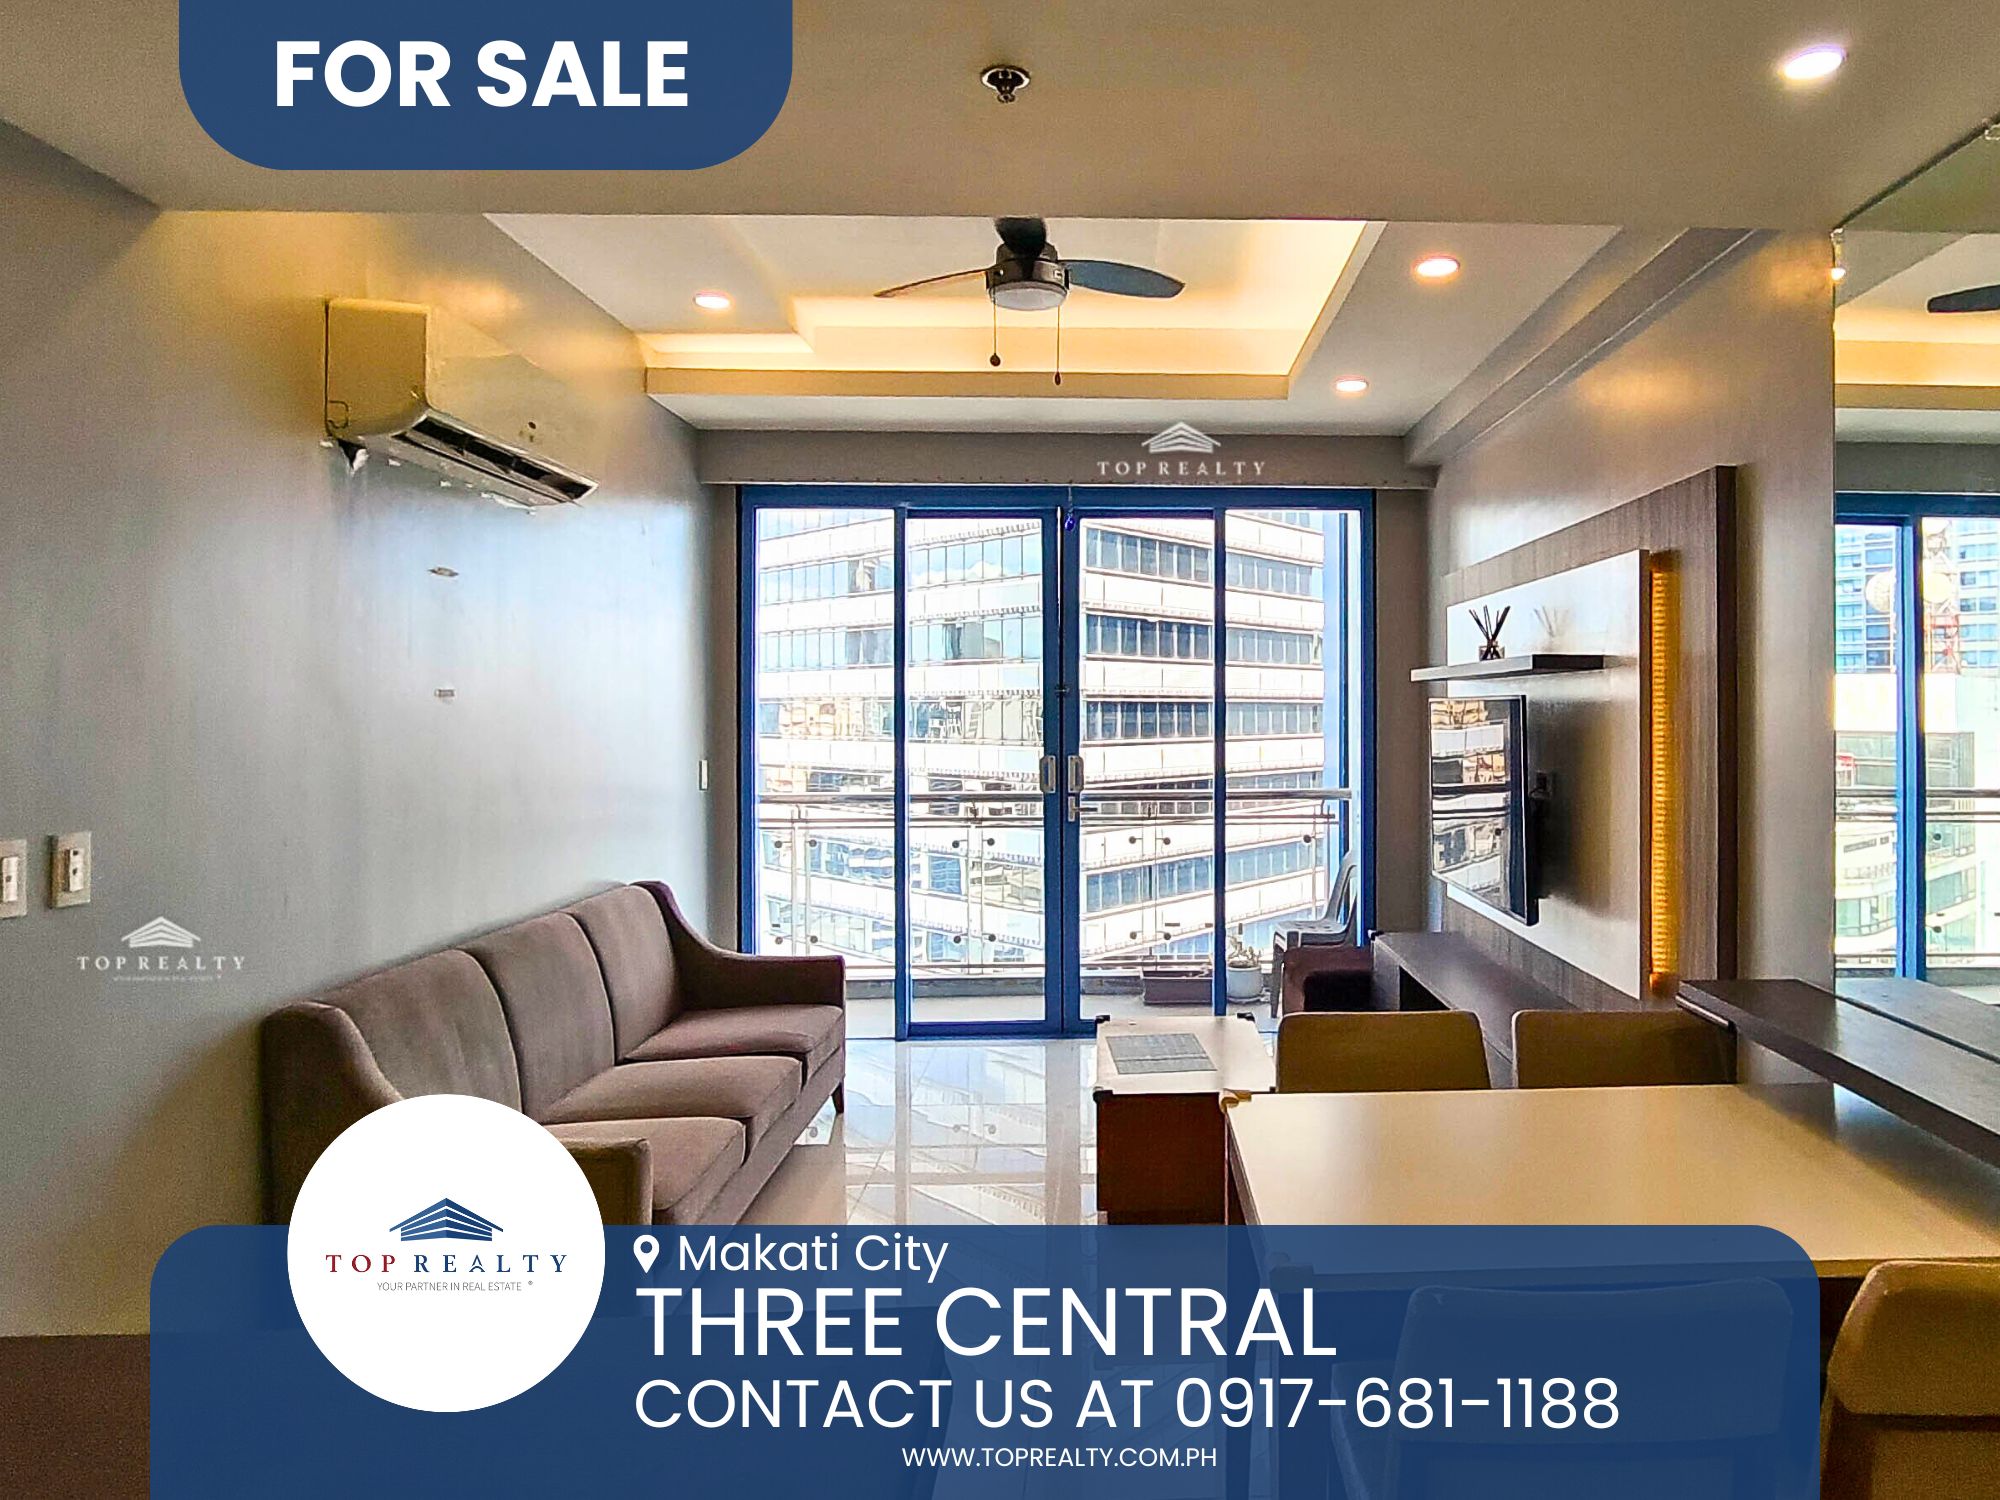 Condo for Sale in Makati City, Three Central 2BR Fully furnished